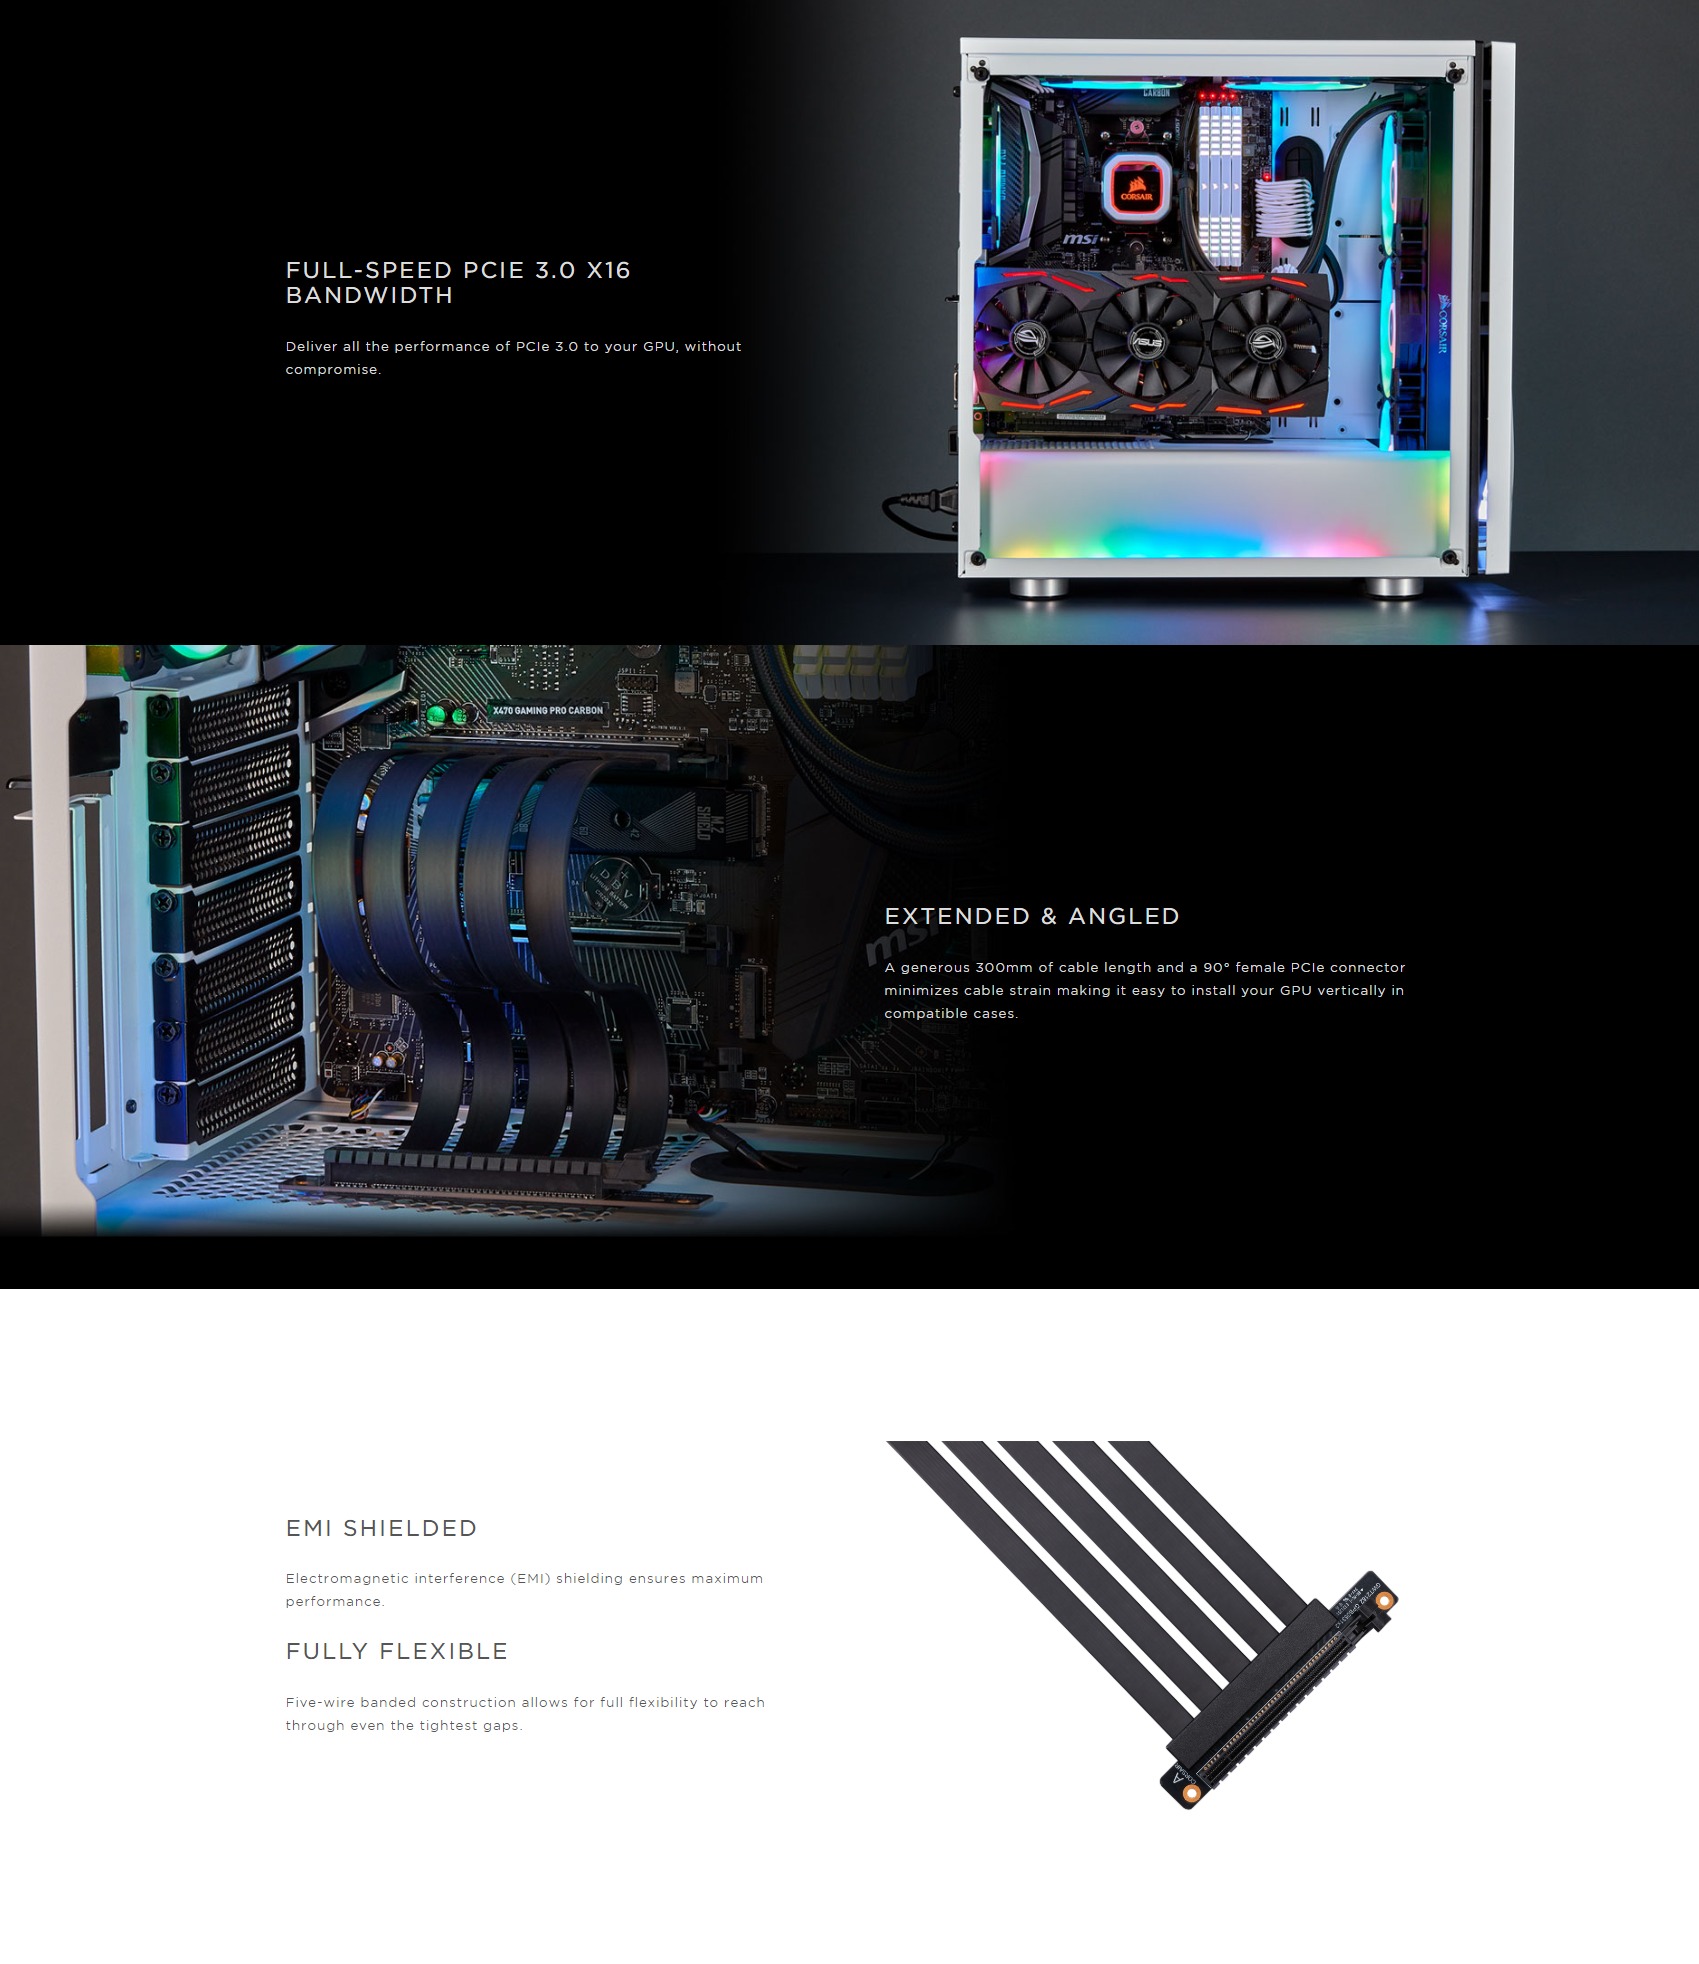 A large marketing image providing additional information about the product Corsair PCI Express 3.0 x16 Extension Cable - Additional alt info not provided